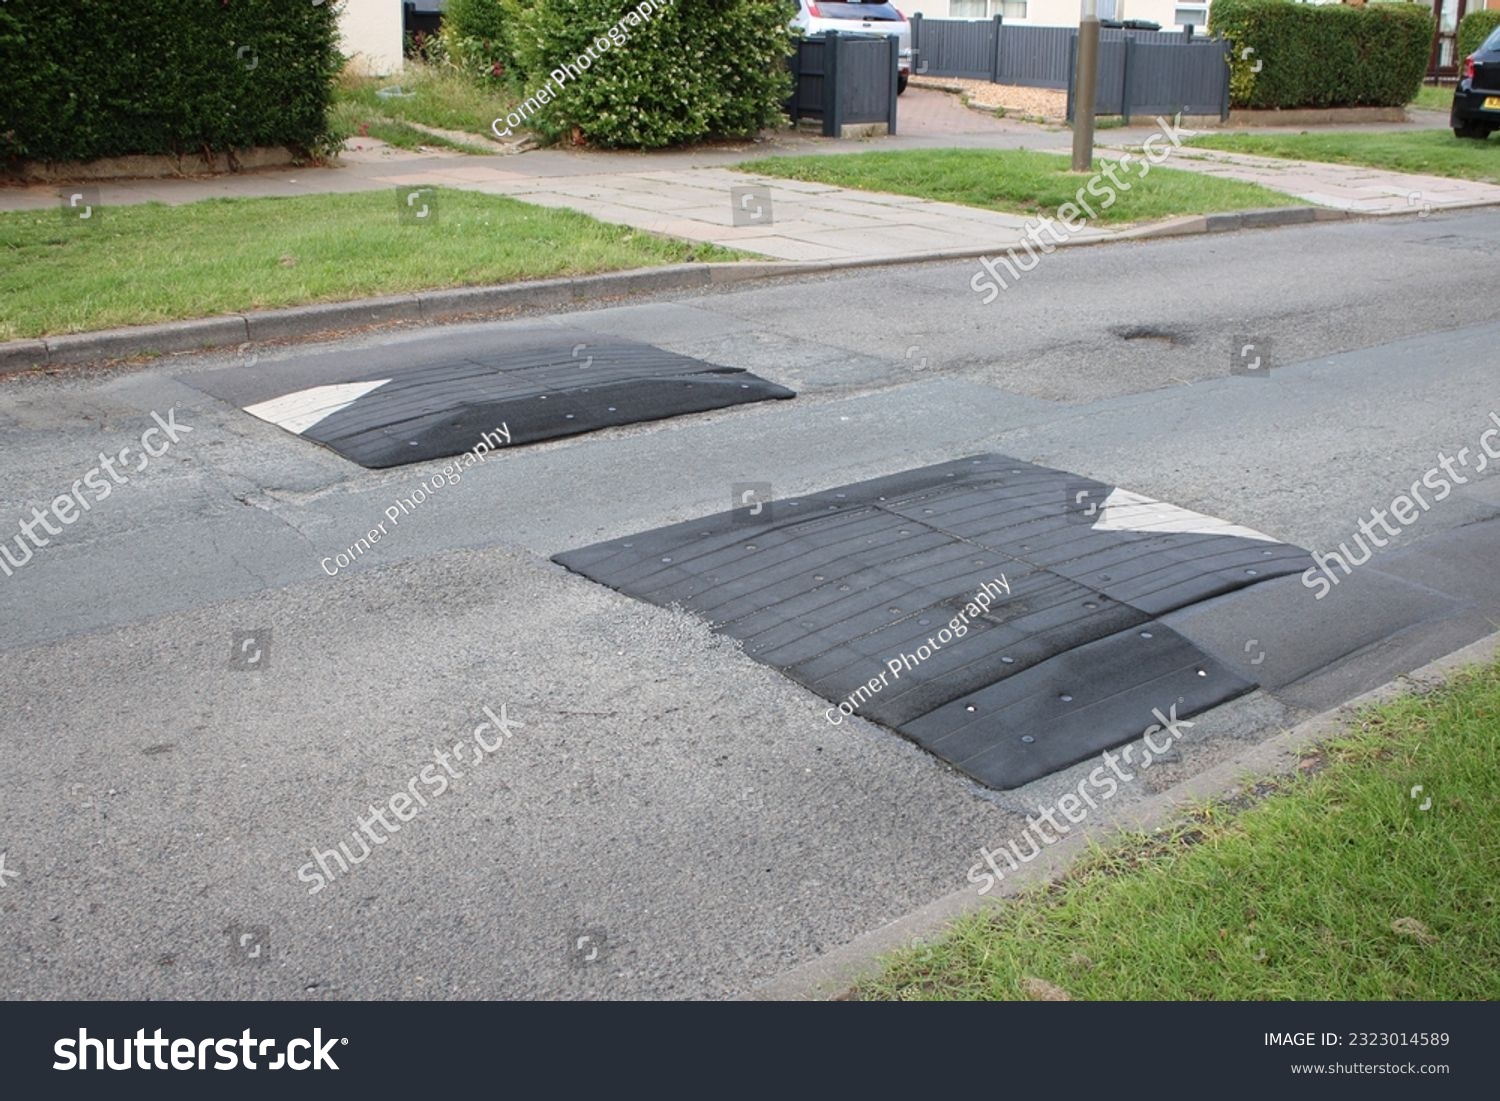 Speed bumps on a residential road #2323014589